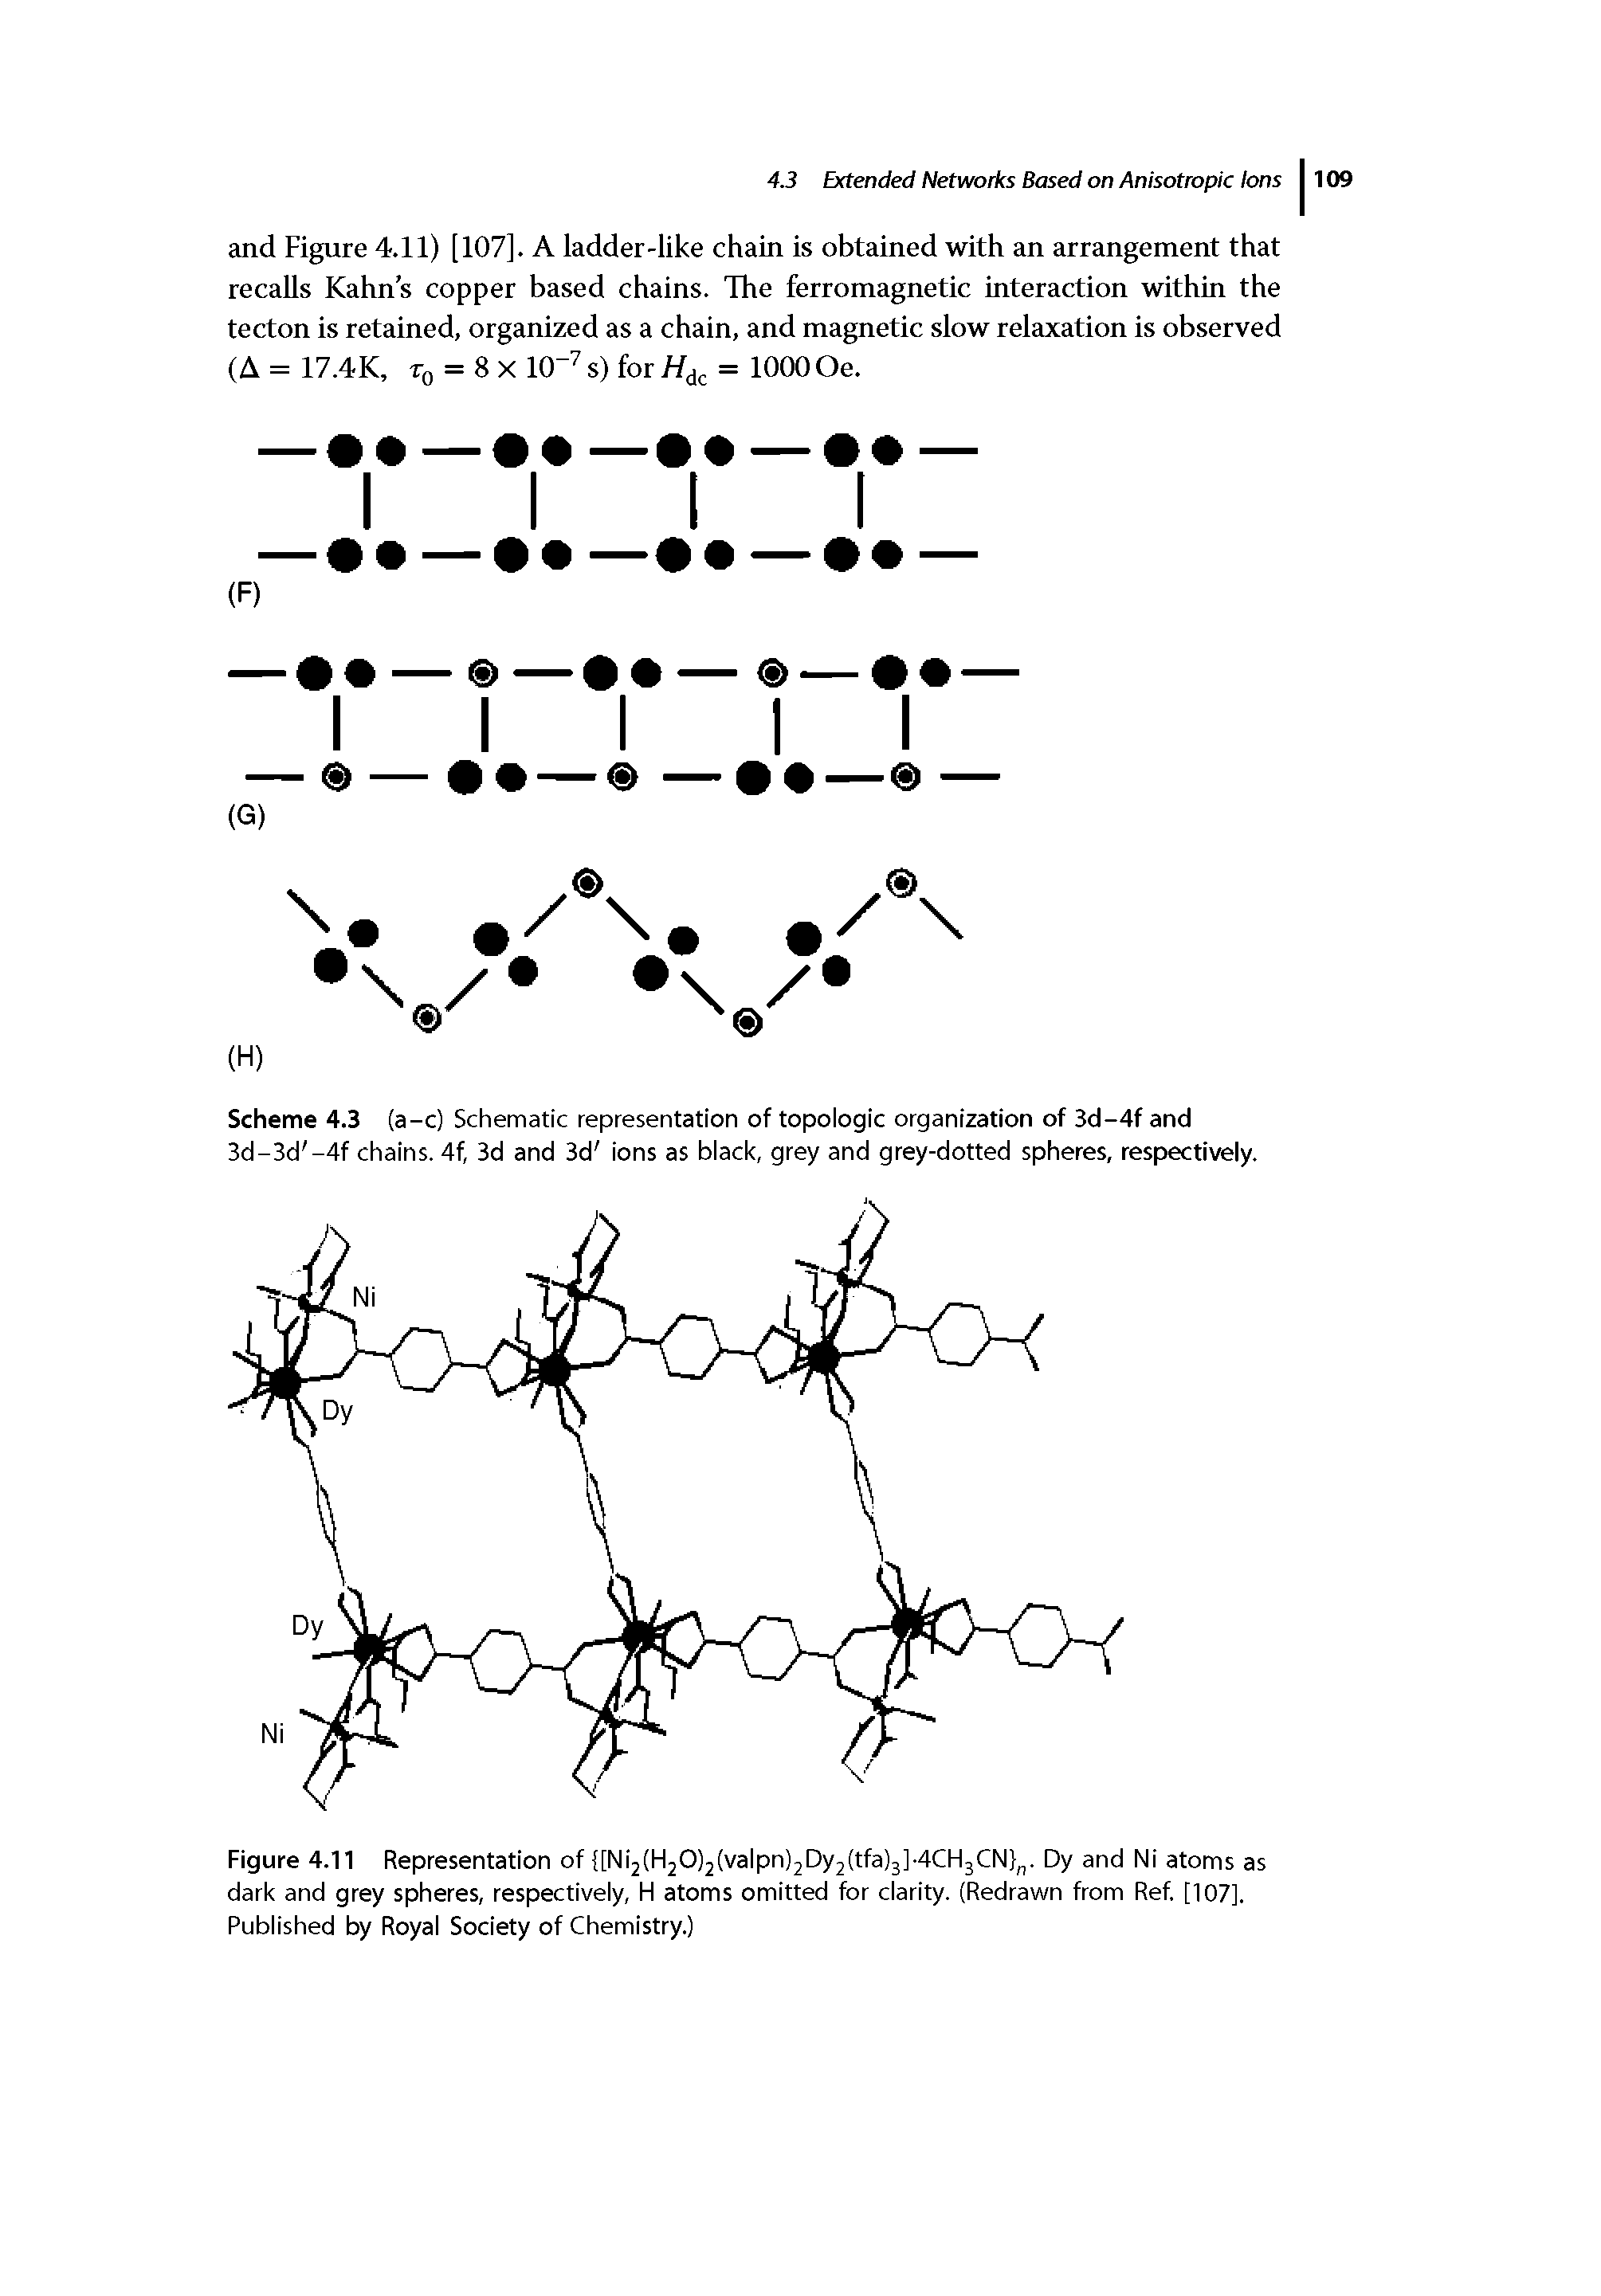 Figure 4.11 Representation of [Ni2(H20)2(valpn)2Dy2(tfa)3]4CH3CN n. Dy and Ni atoms as dark and grey spheres, respectively, H atoms omitted for clarity. (Redrawn from Ref. [107], Published by Royal Society of Chemistry.)...